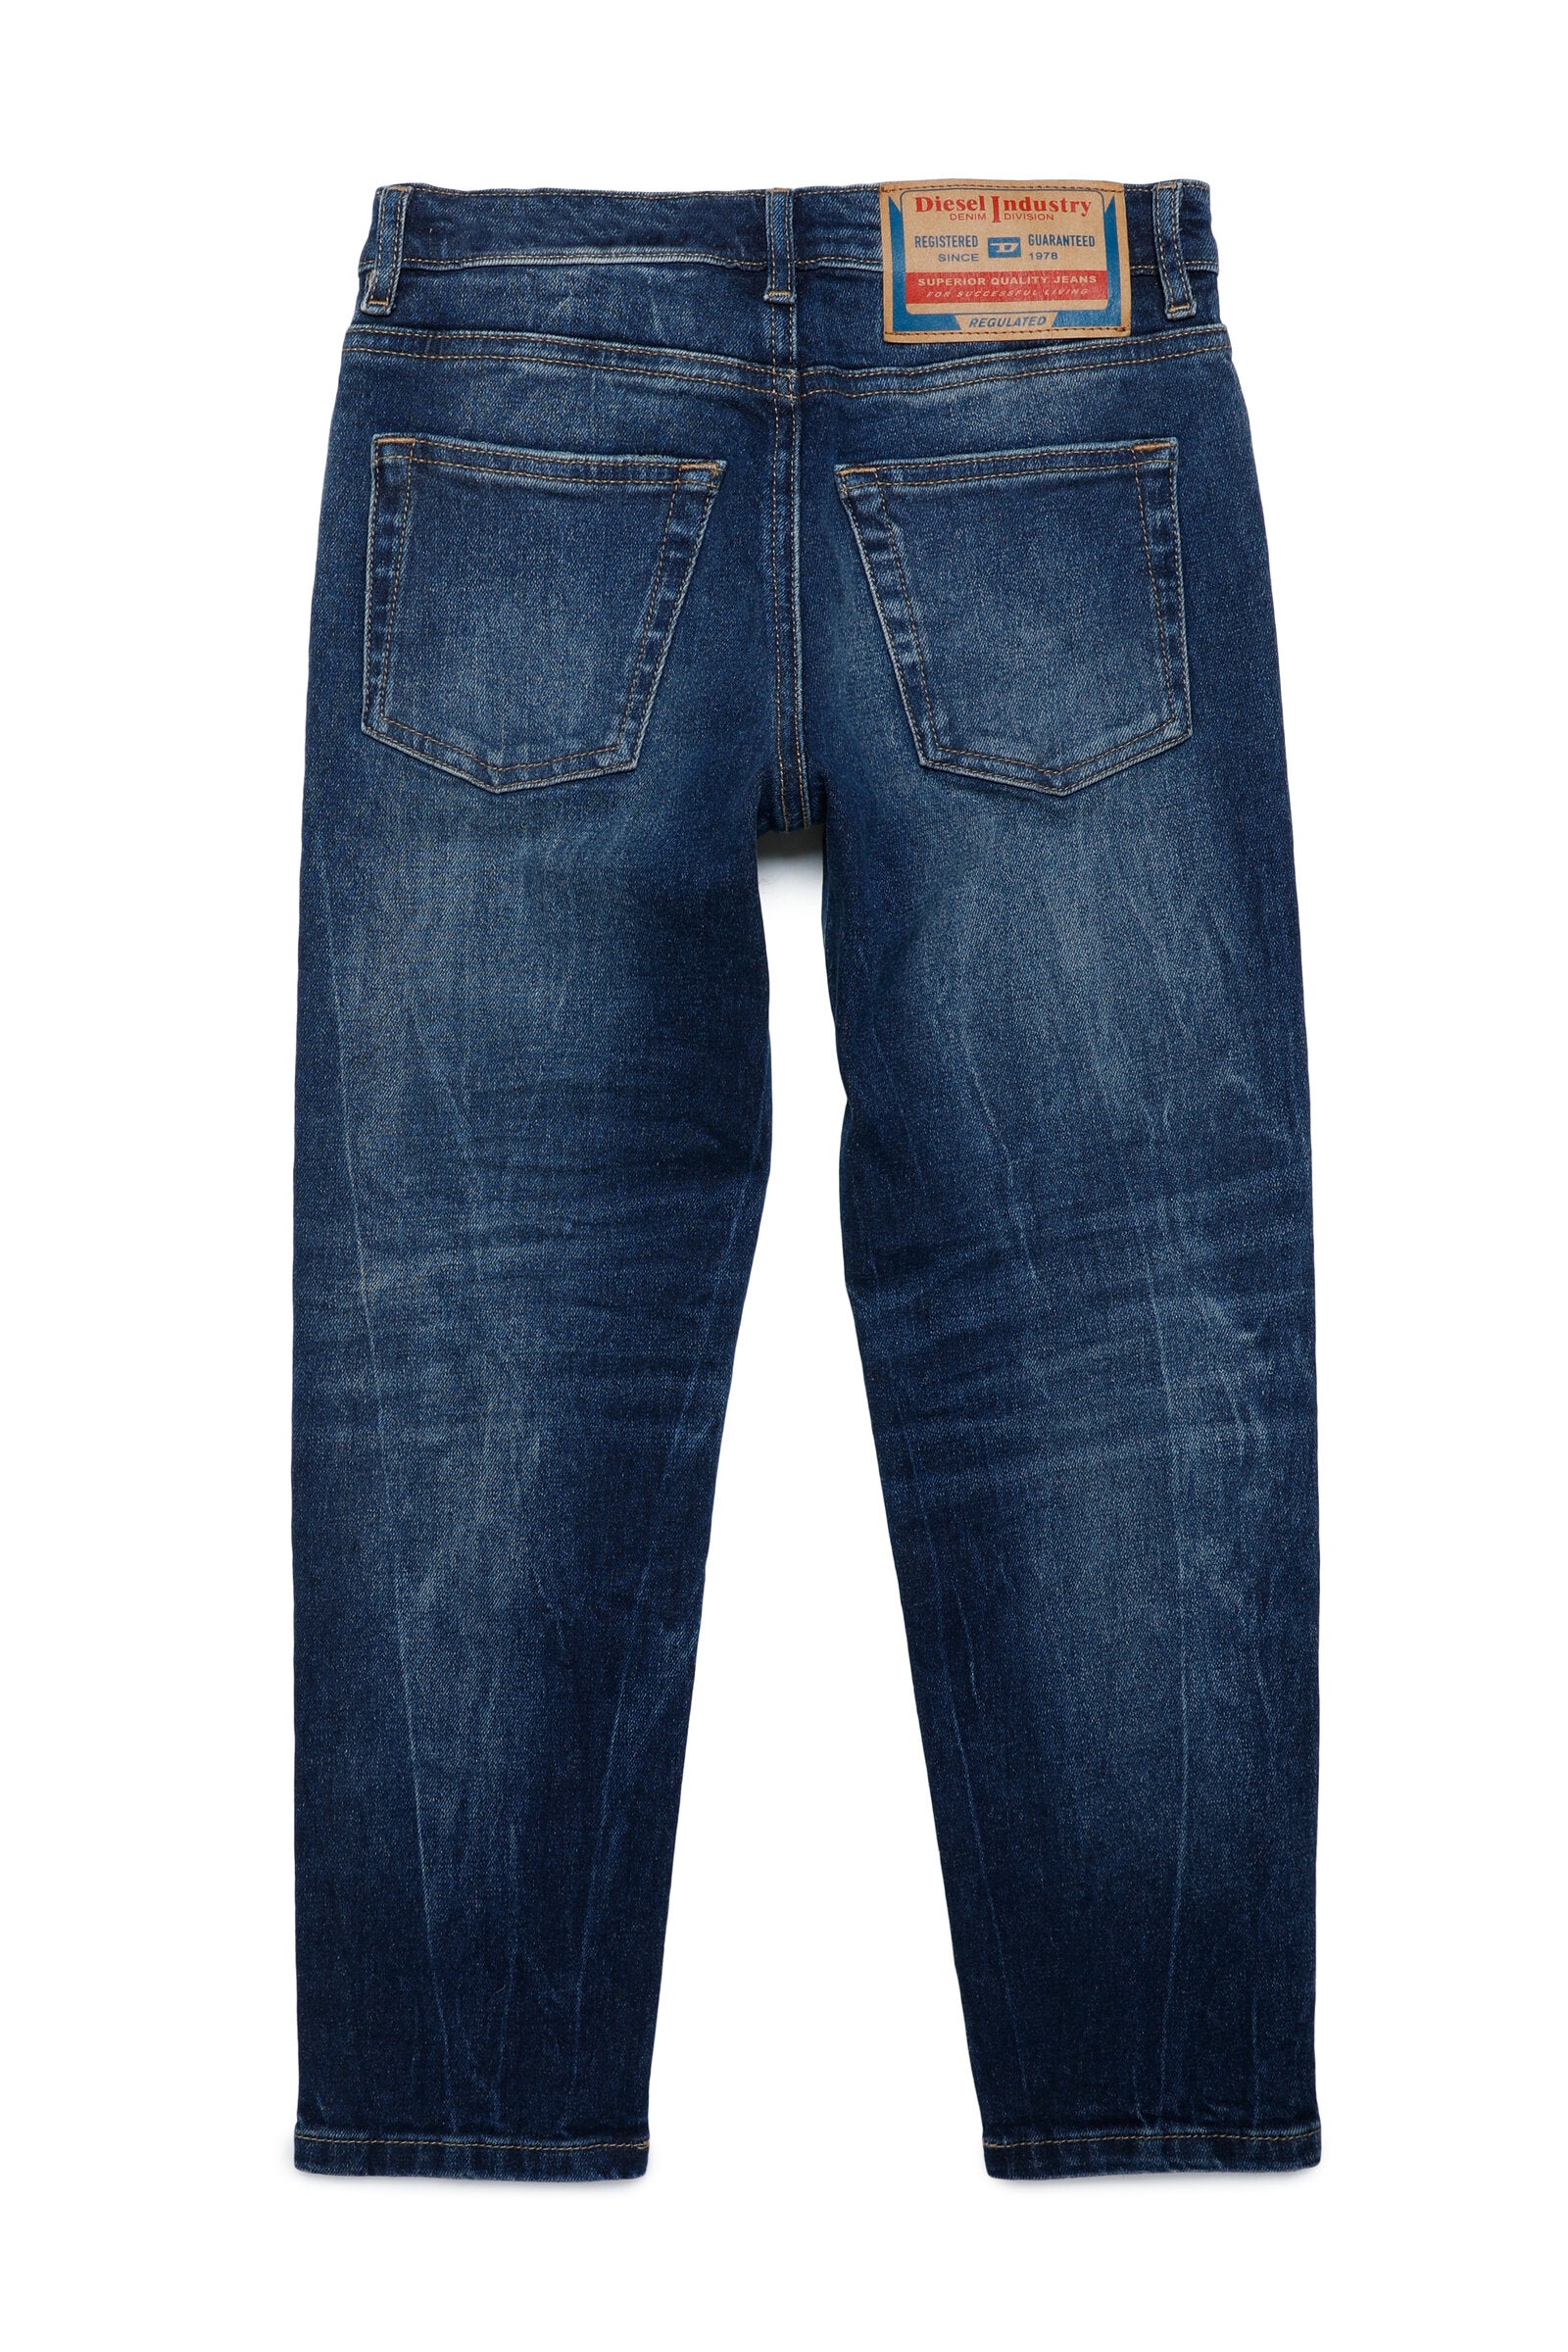 Jeans D-Lucas tapered dark blue  with rips